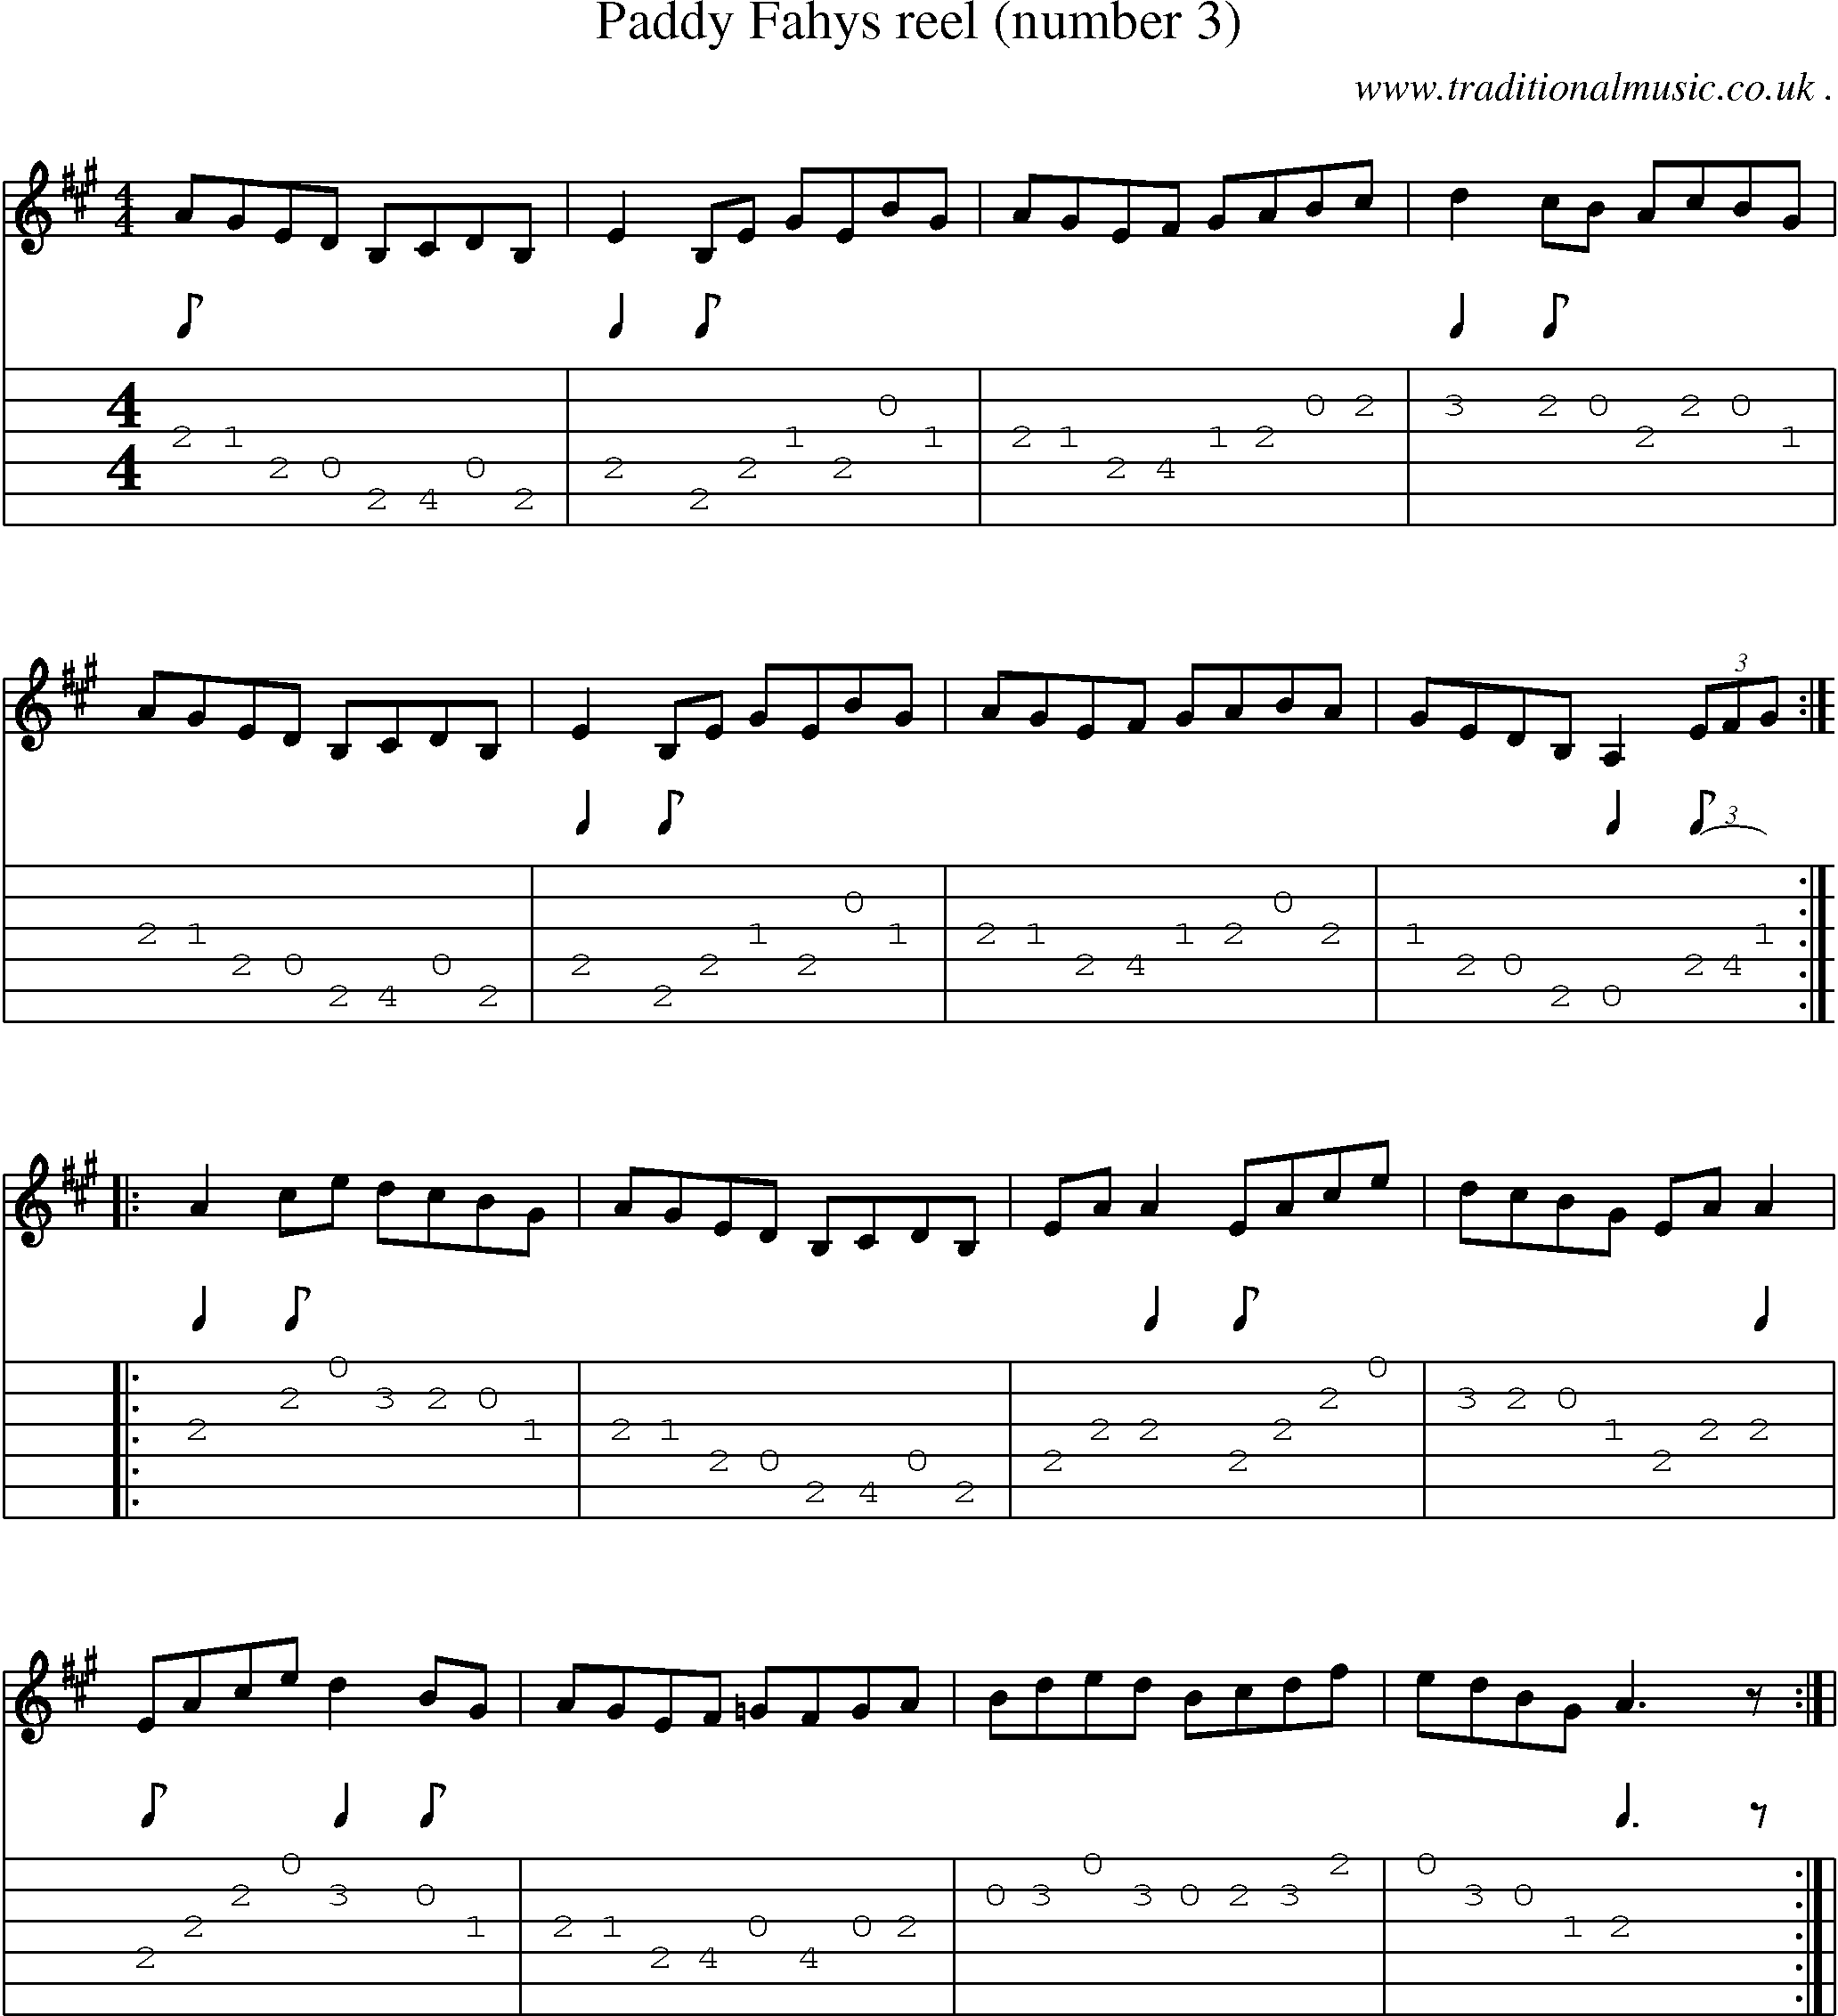 Sheet-Music and Guitar Tabs for Paddy Fahys Reel (number 3)